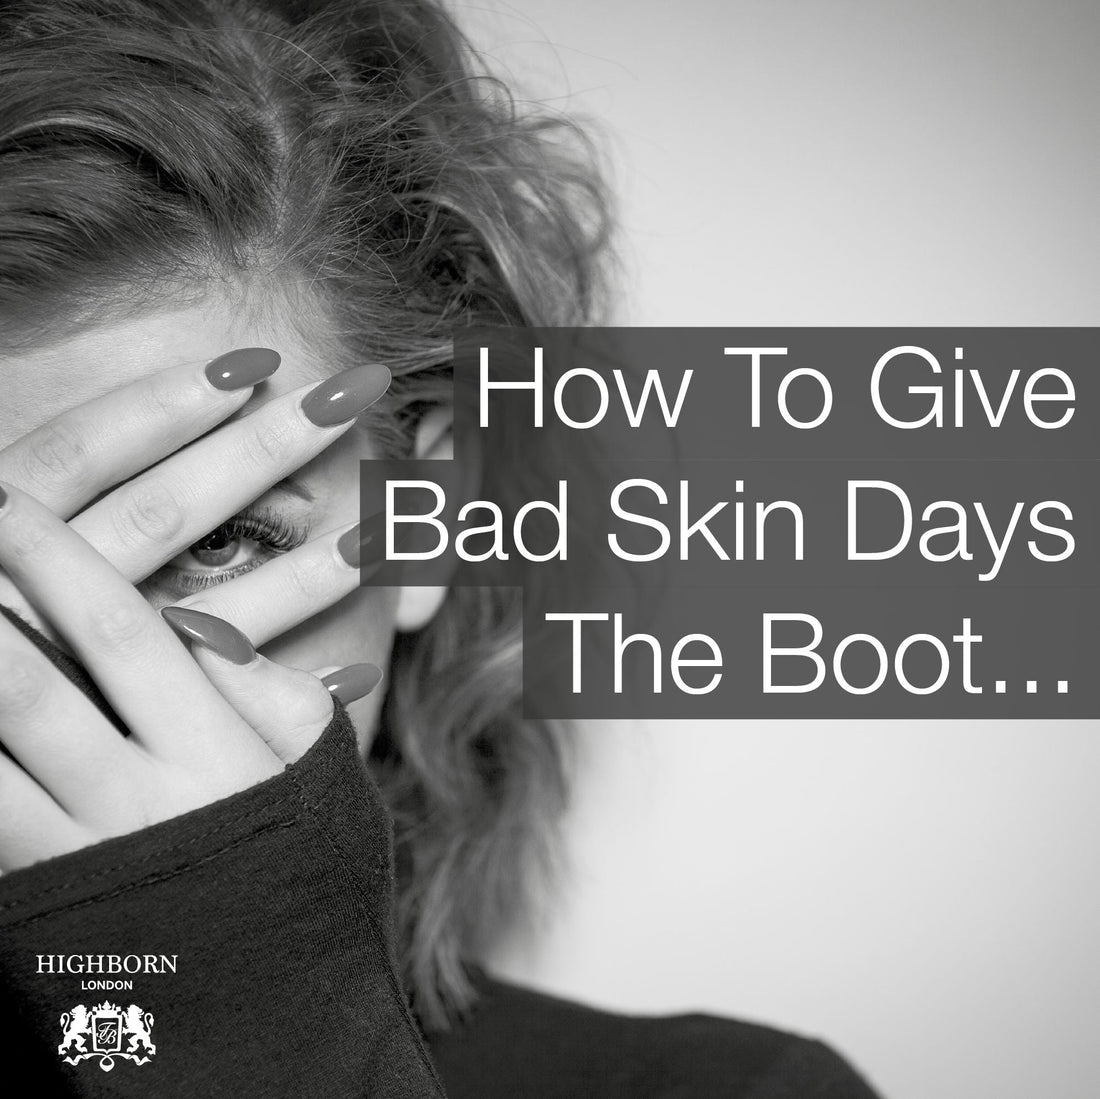 How To Give Bad Skin Days The Boot - HighBorn London